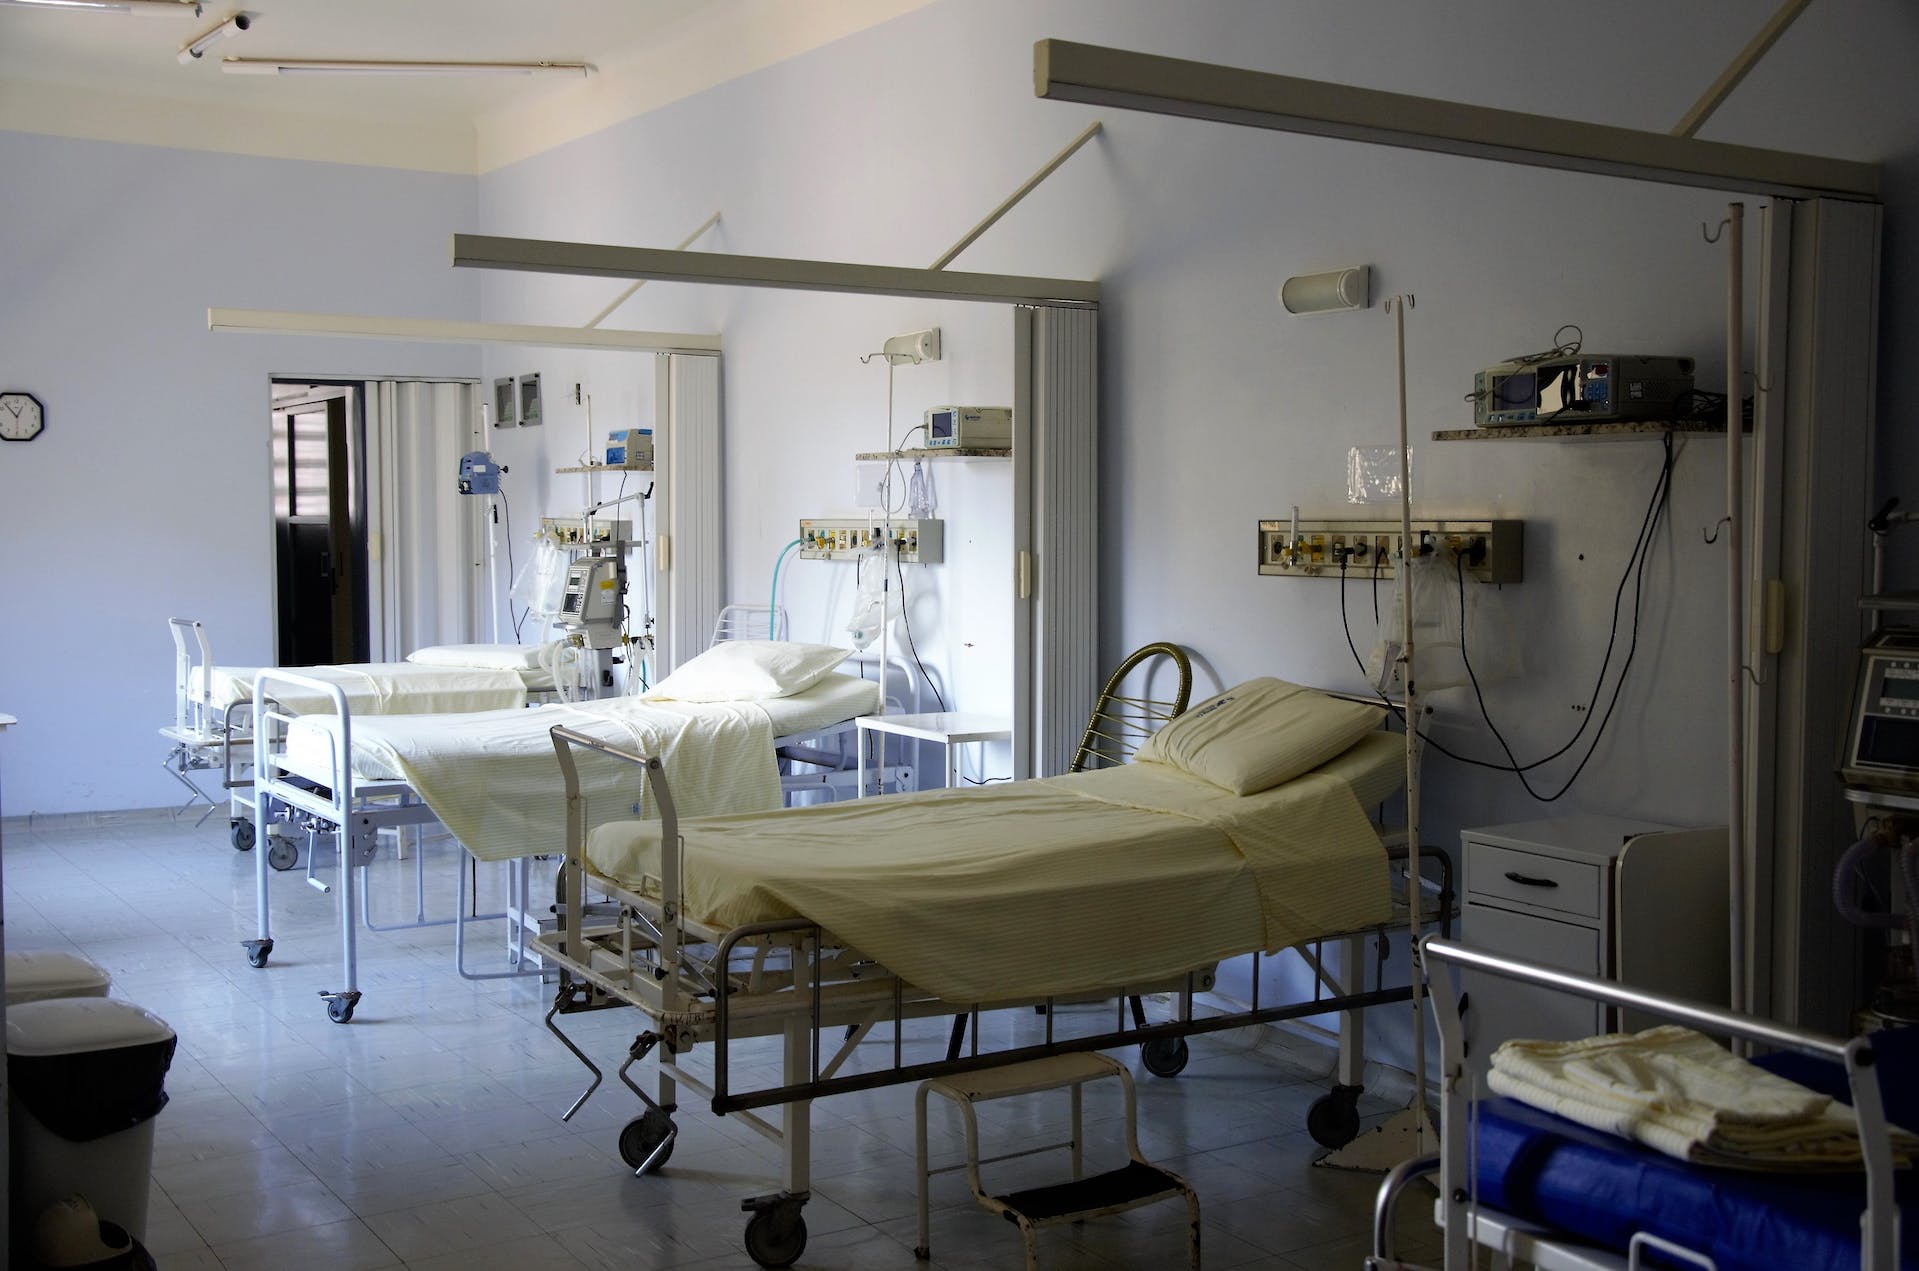 Hospital ward with empty beds | Source: Pexels